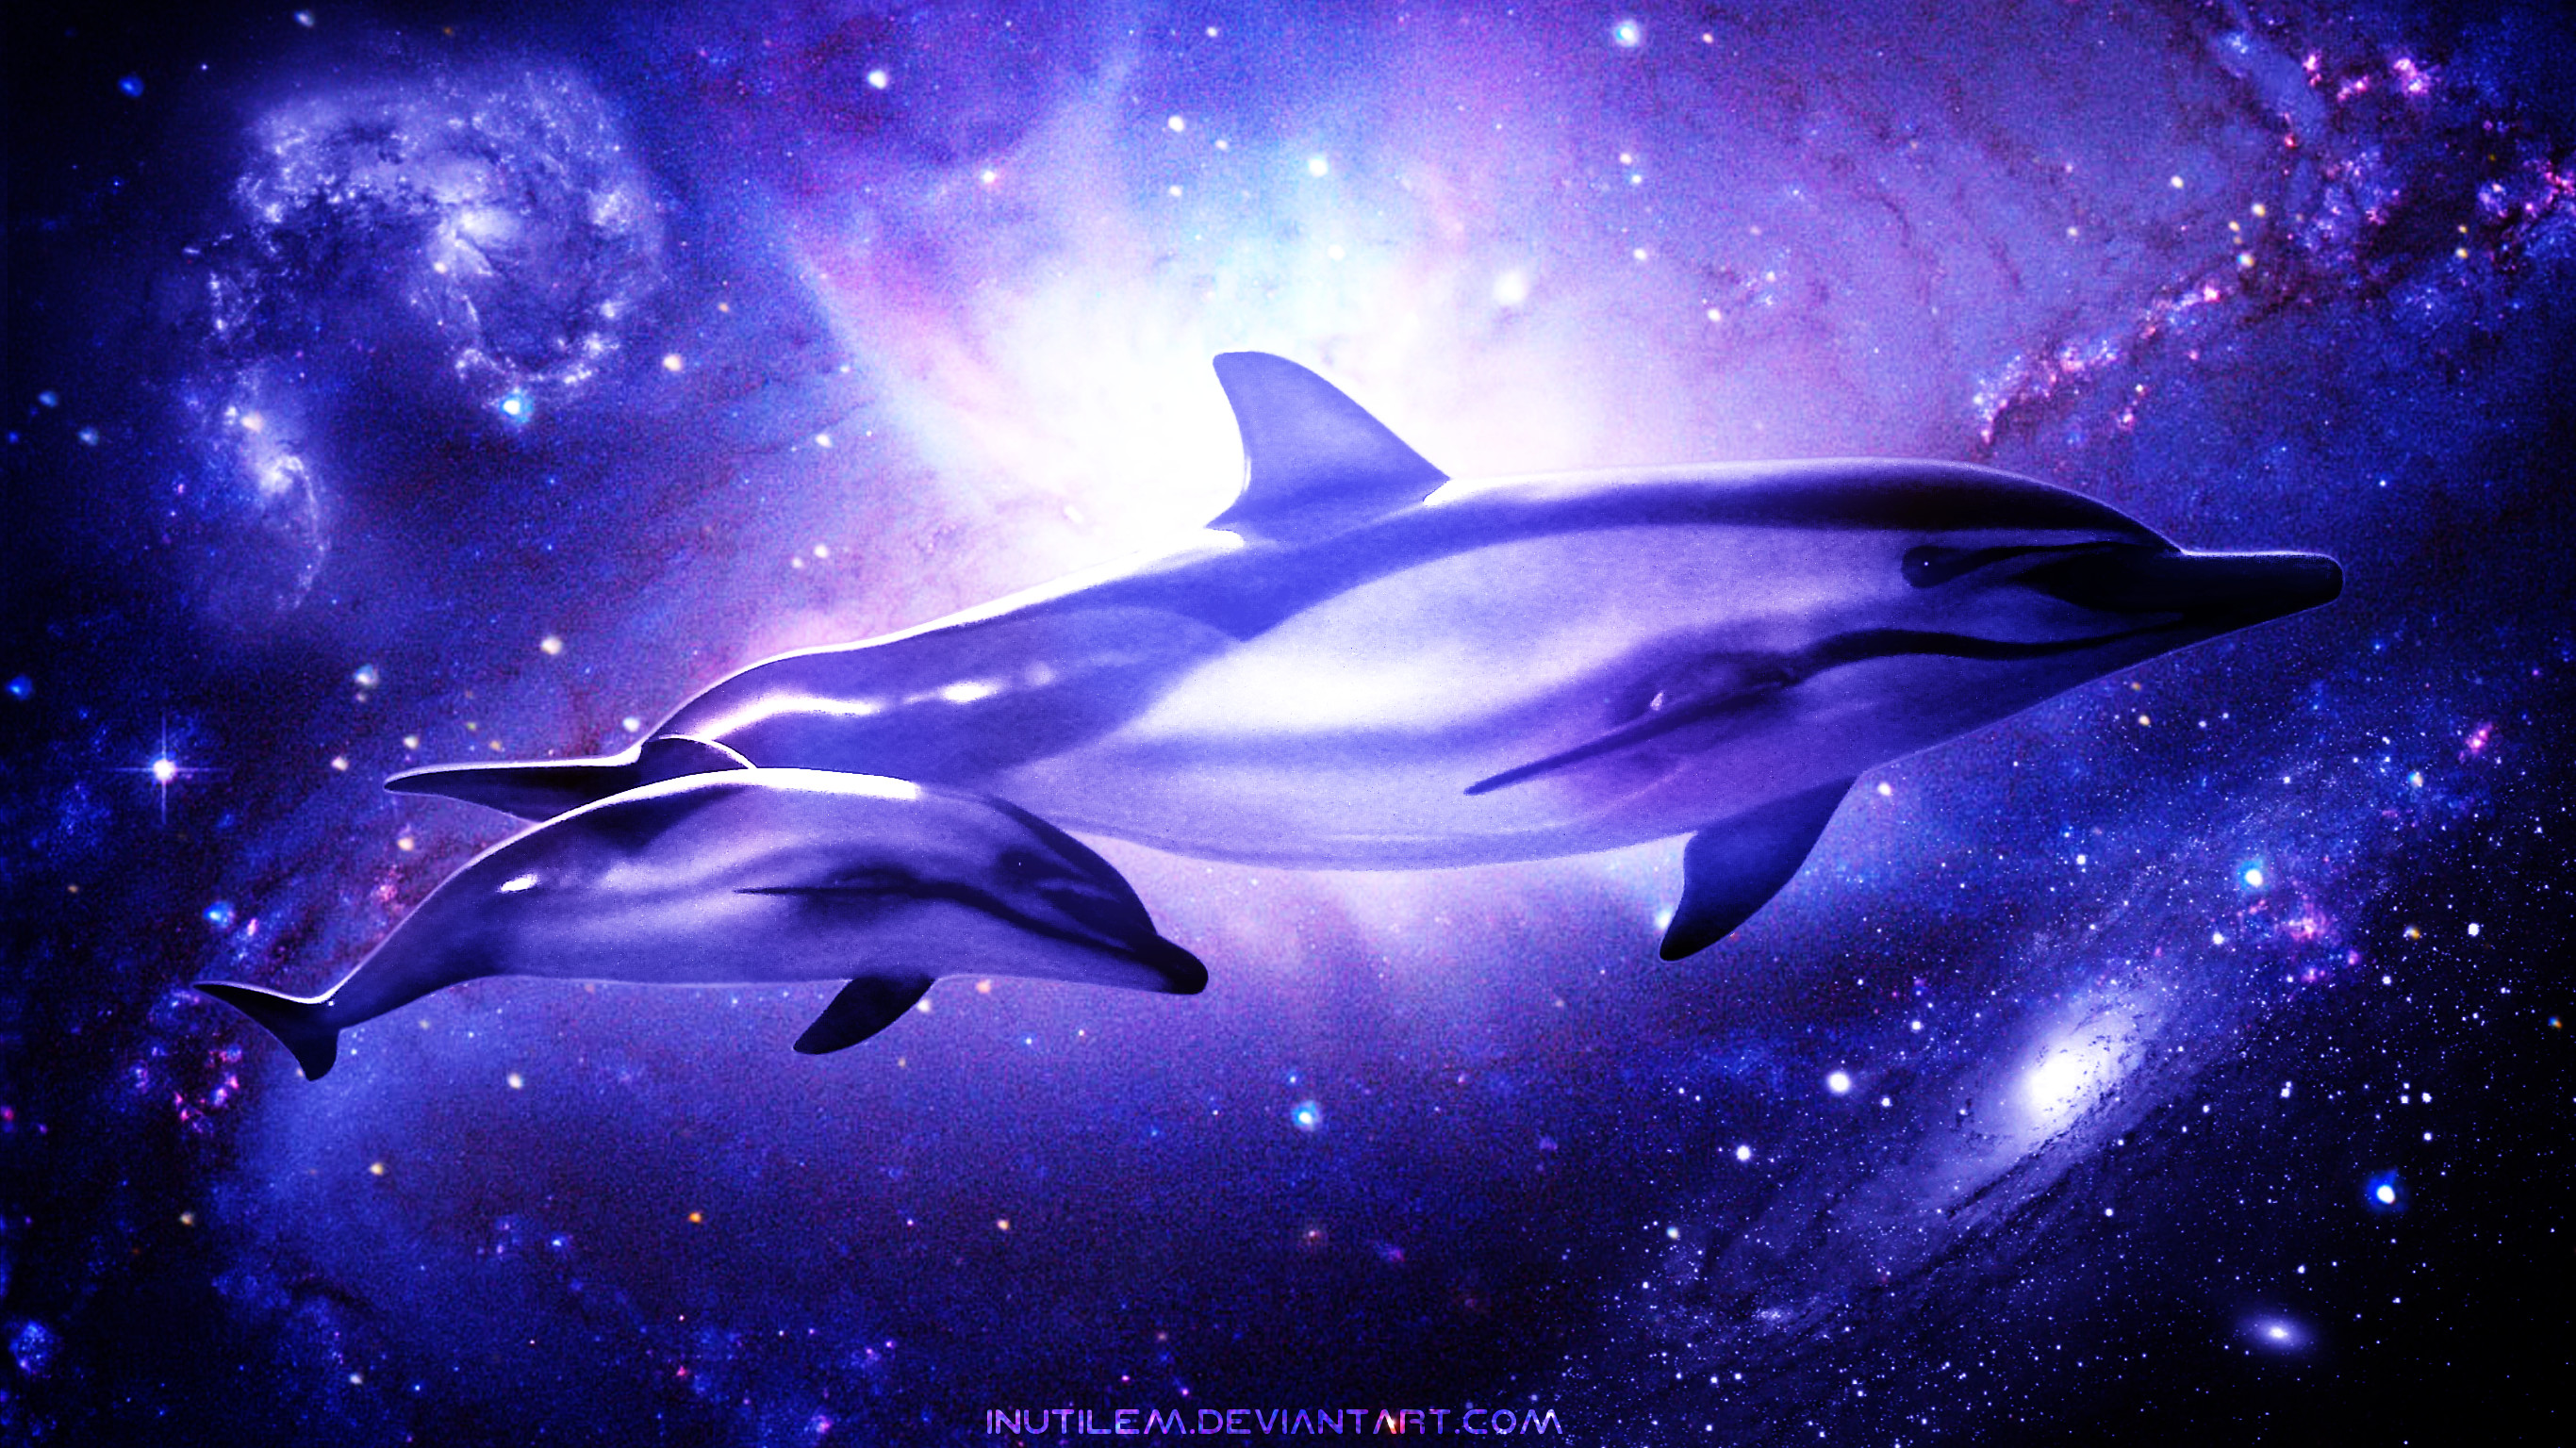 Wallpaper ID 582153  water 1080P underwater dolphins cute free  download